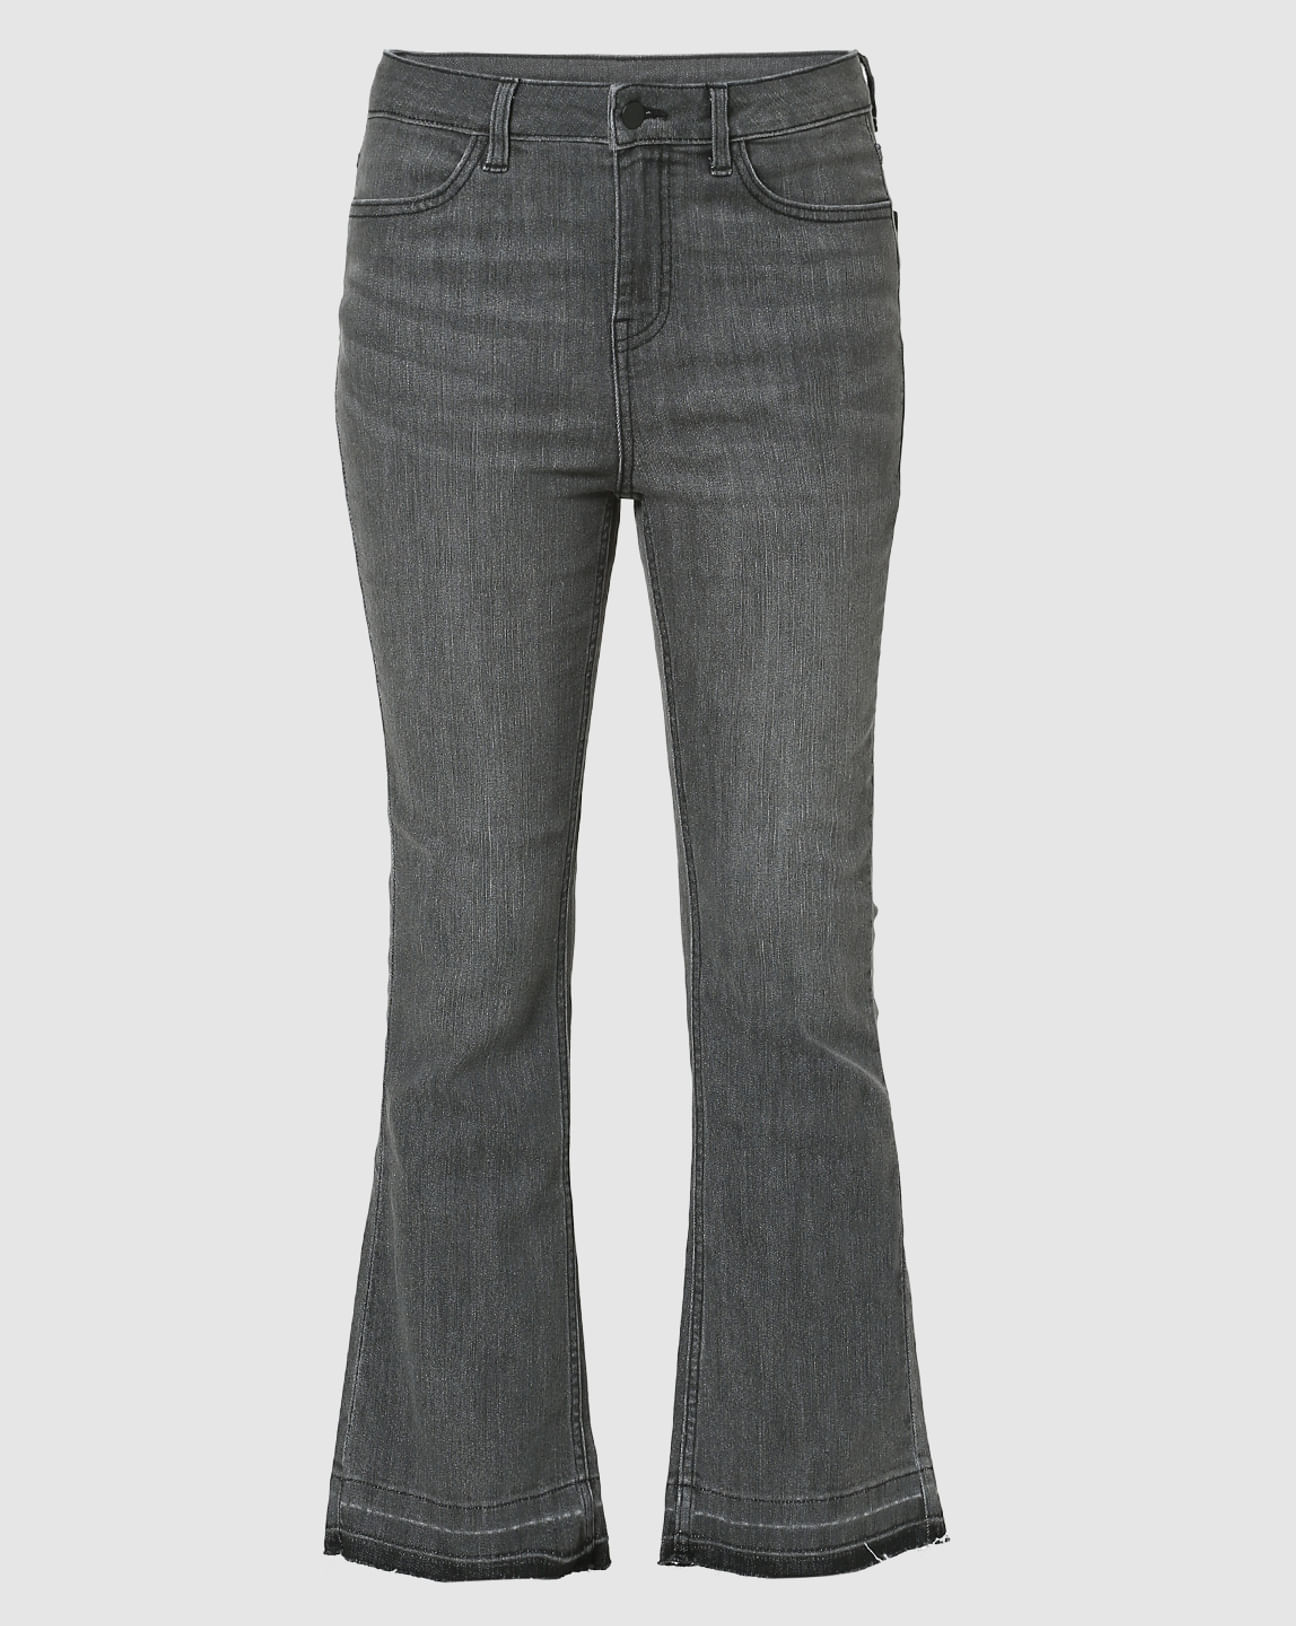 Grey High Rise Bootcut Jeans|244043501-Charcoal-Gray